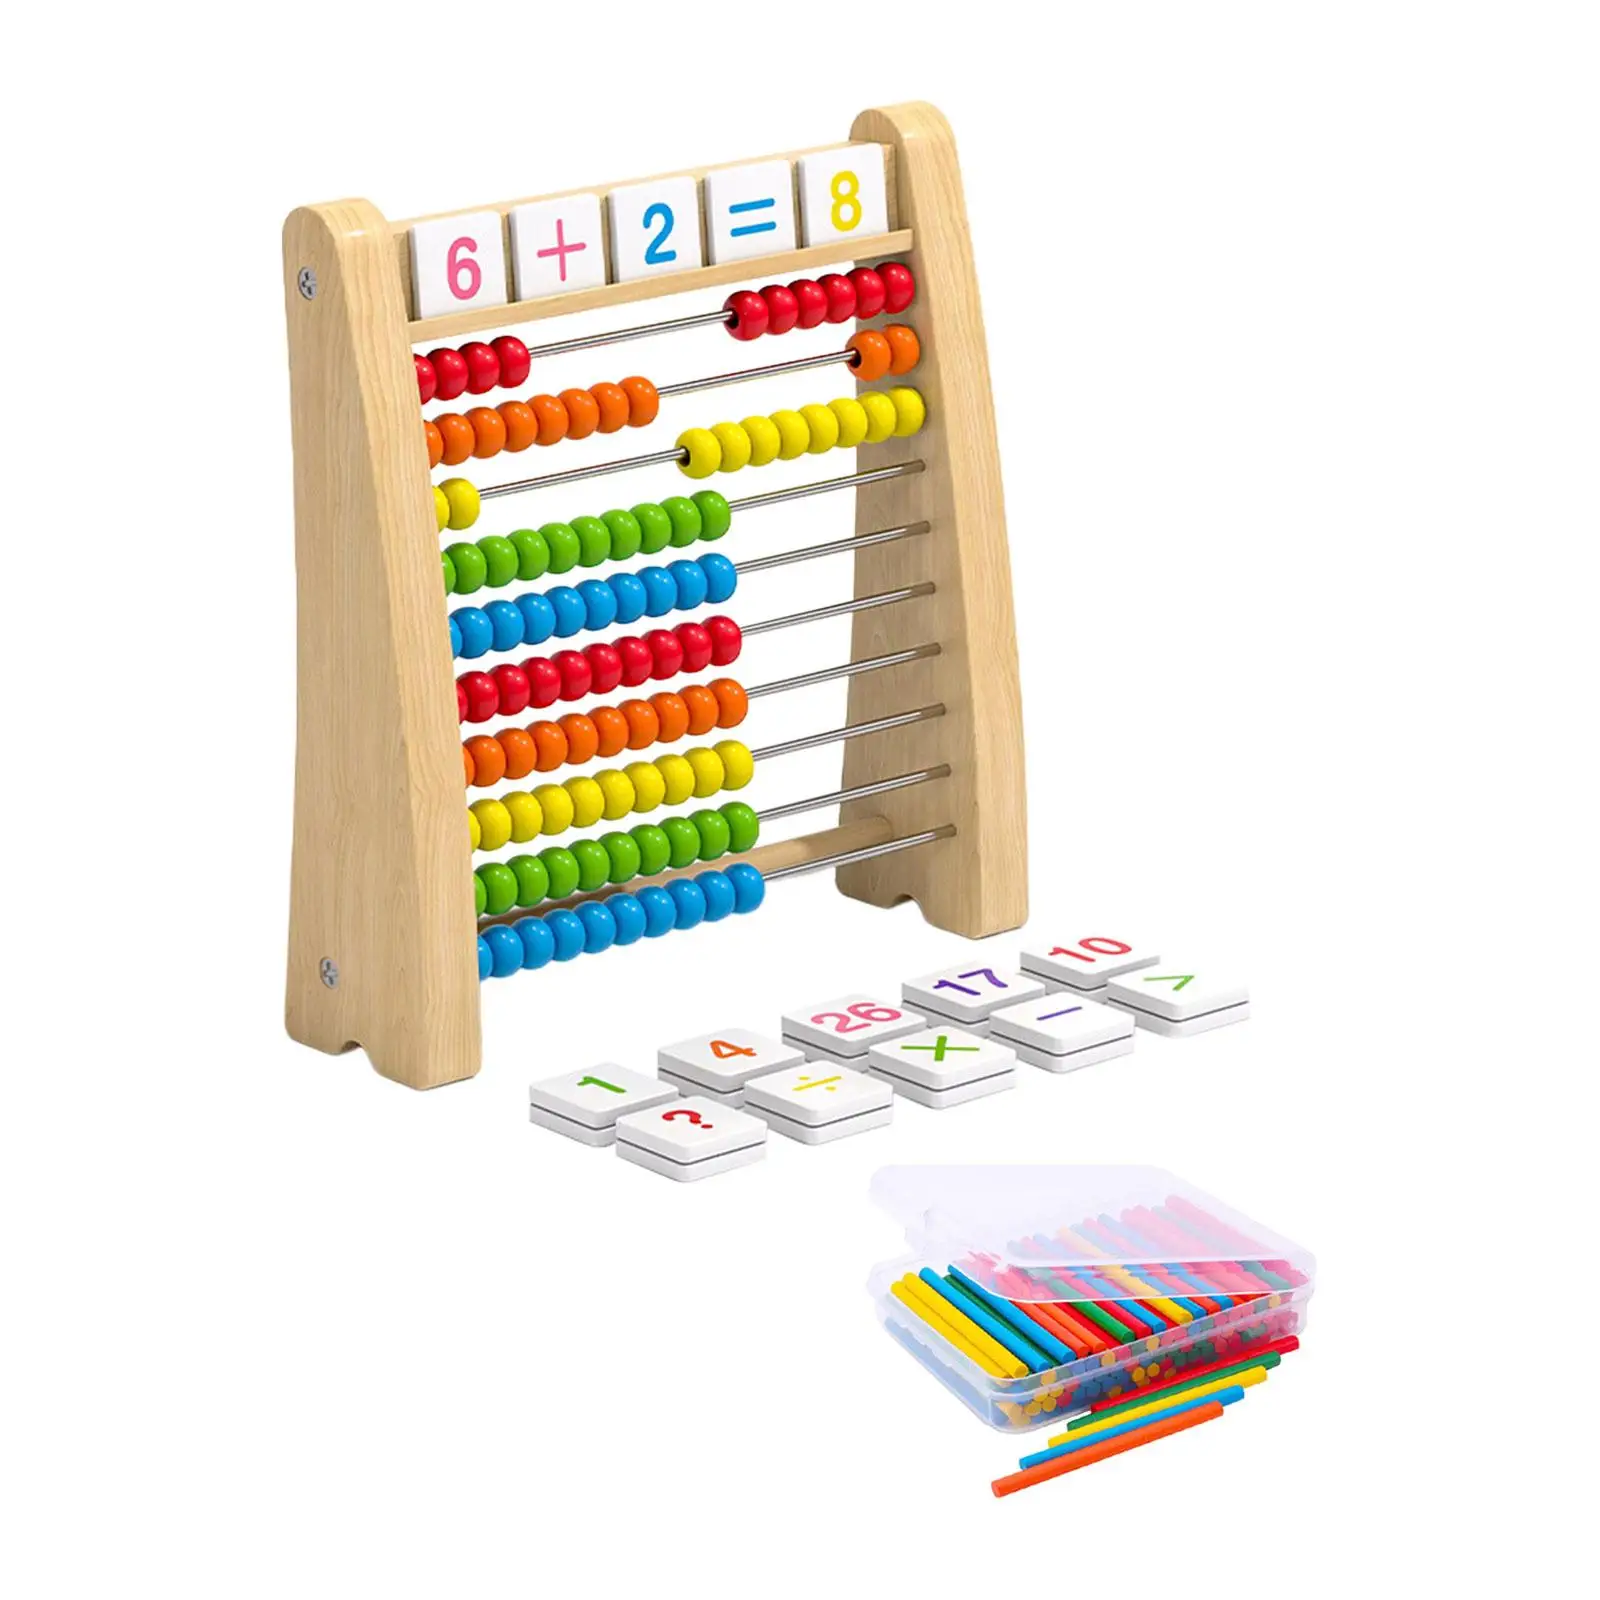 Wooden Abacus Ten Frame Set Educational Counting Frames Toy for Elementary